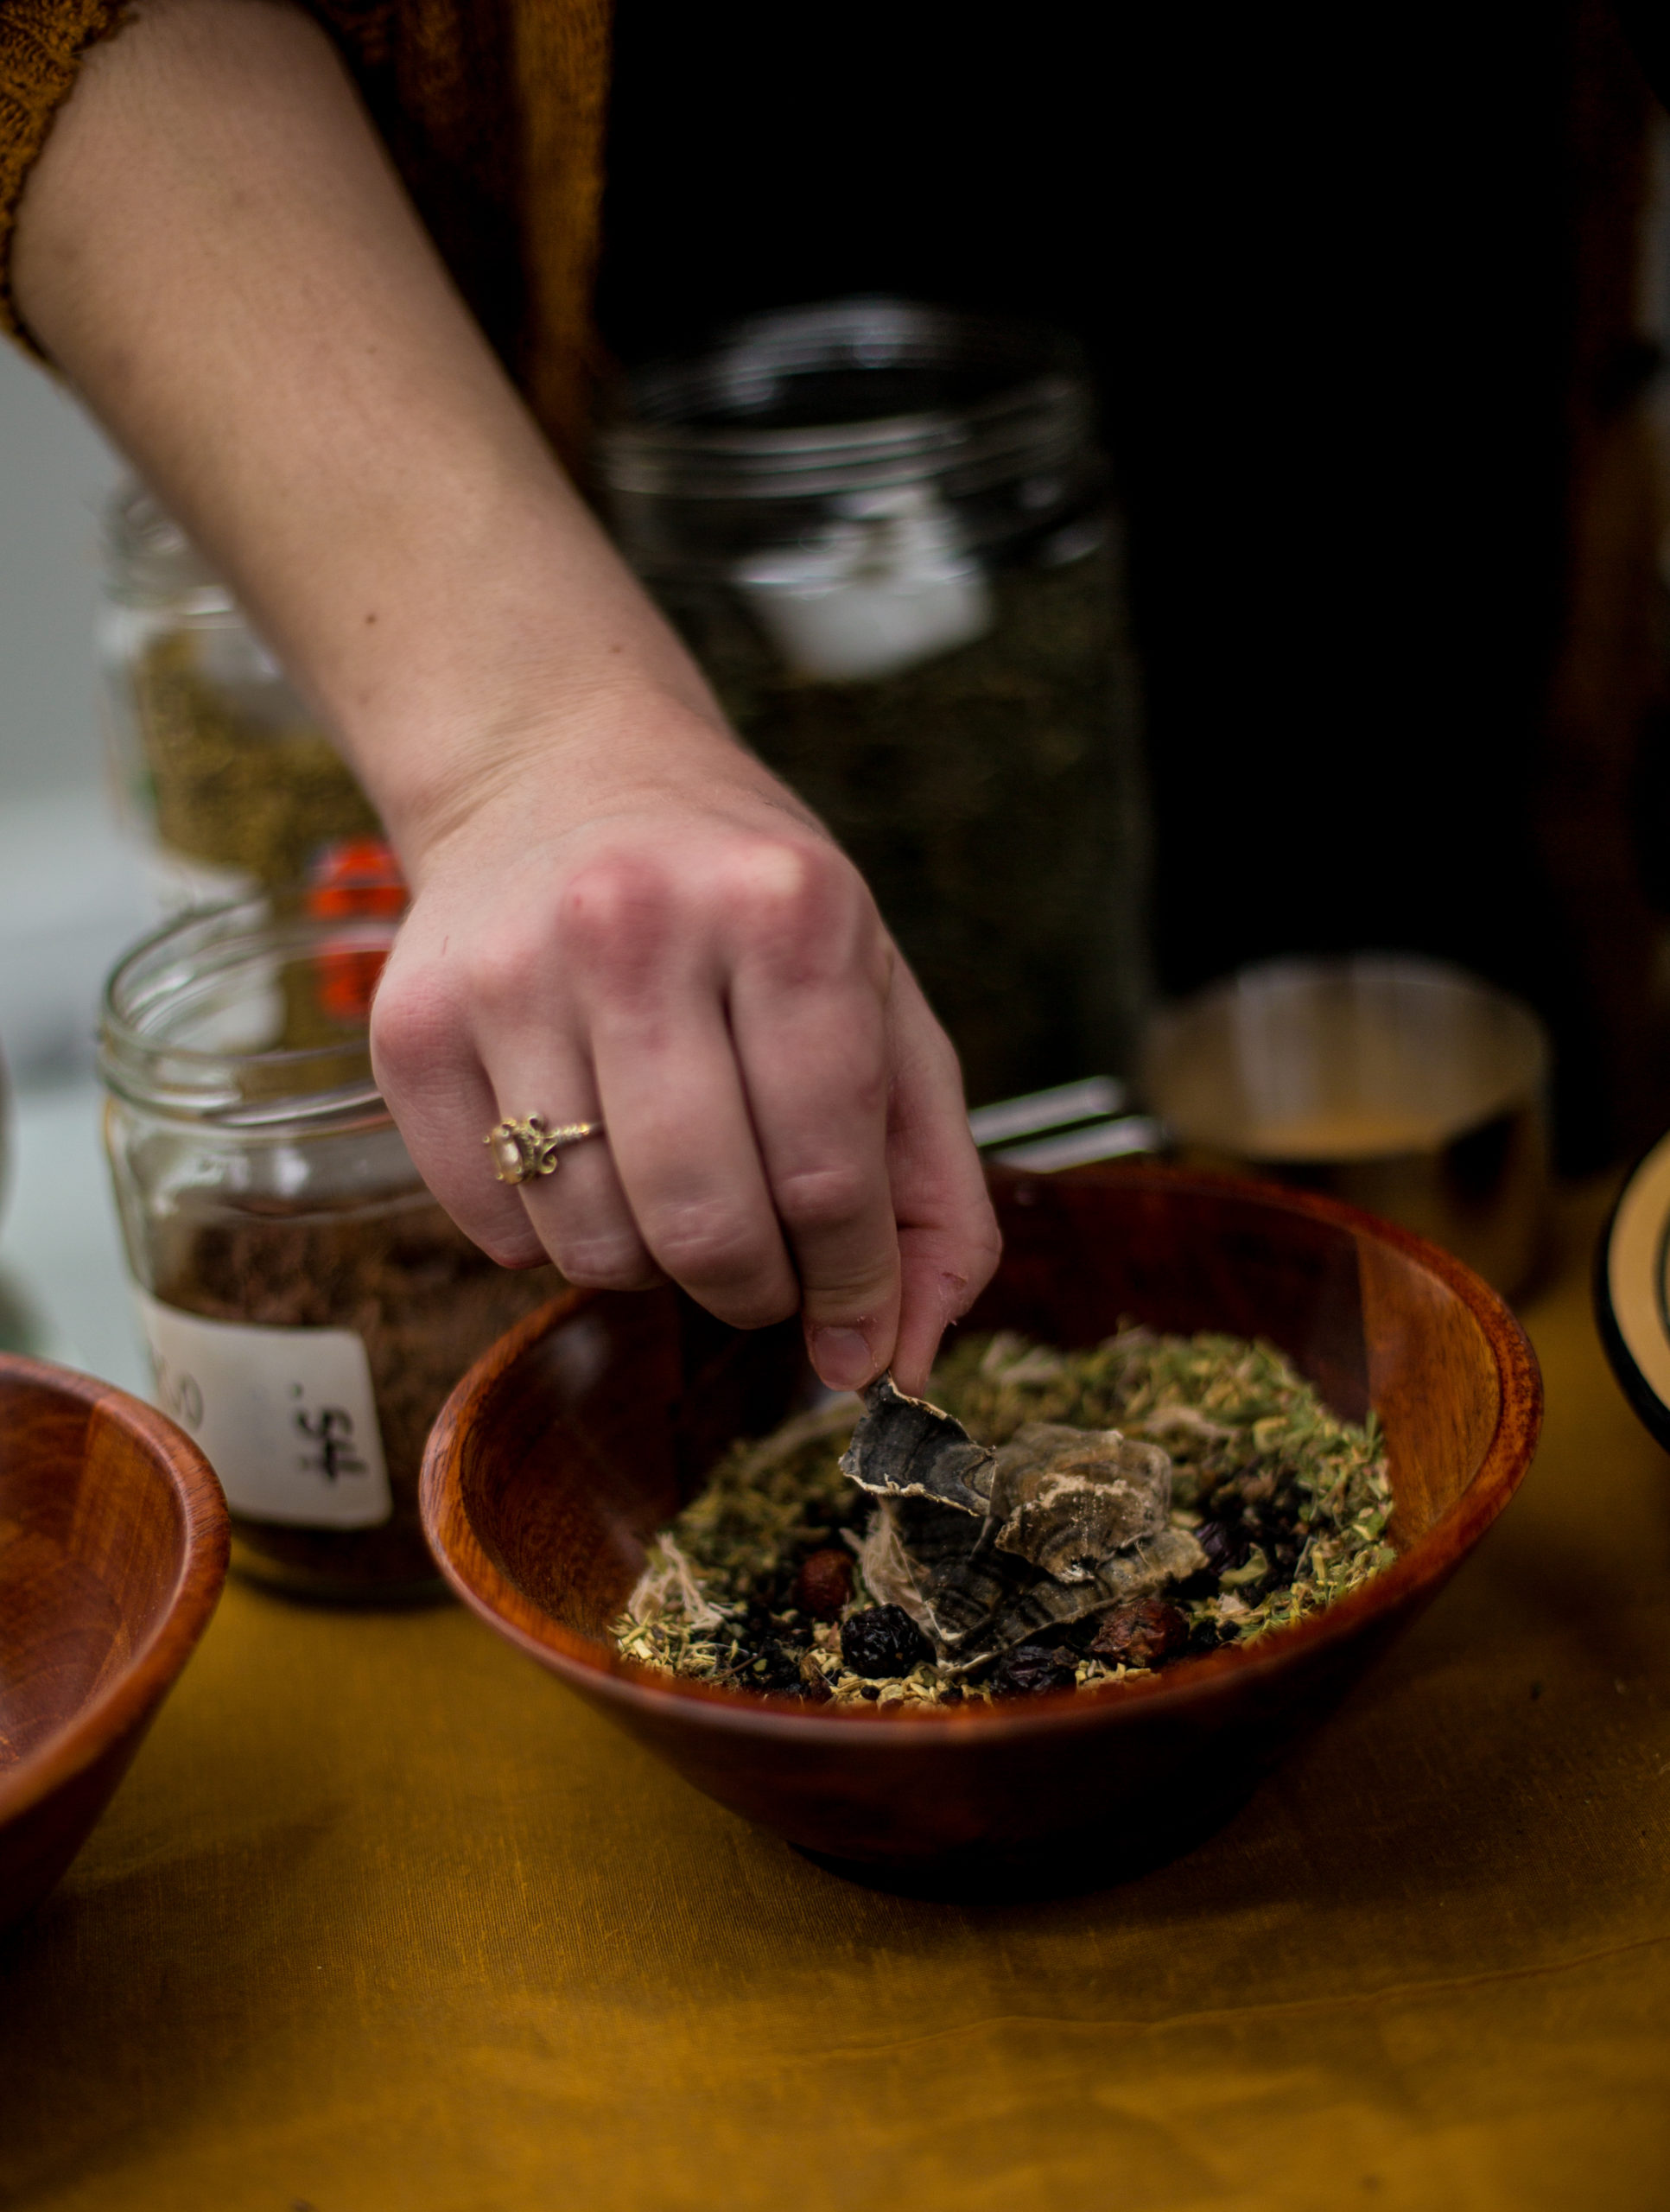 Woman arranges loose leaf tea in a bowl for branding photography session